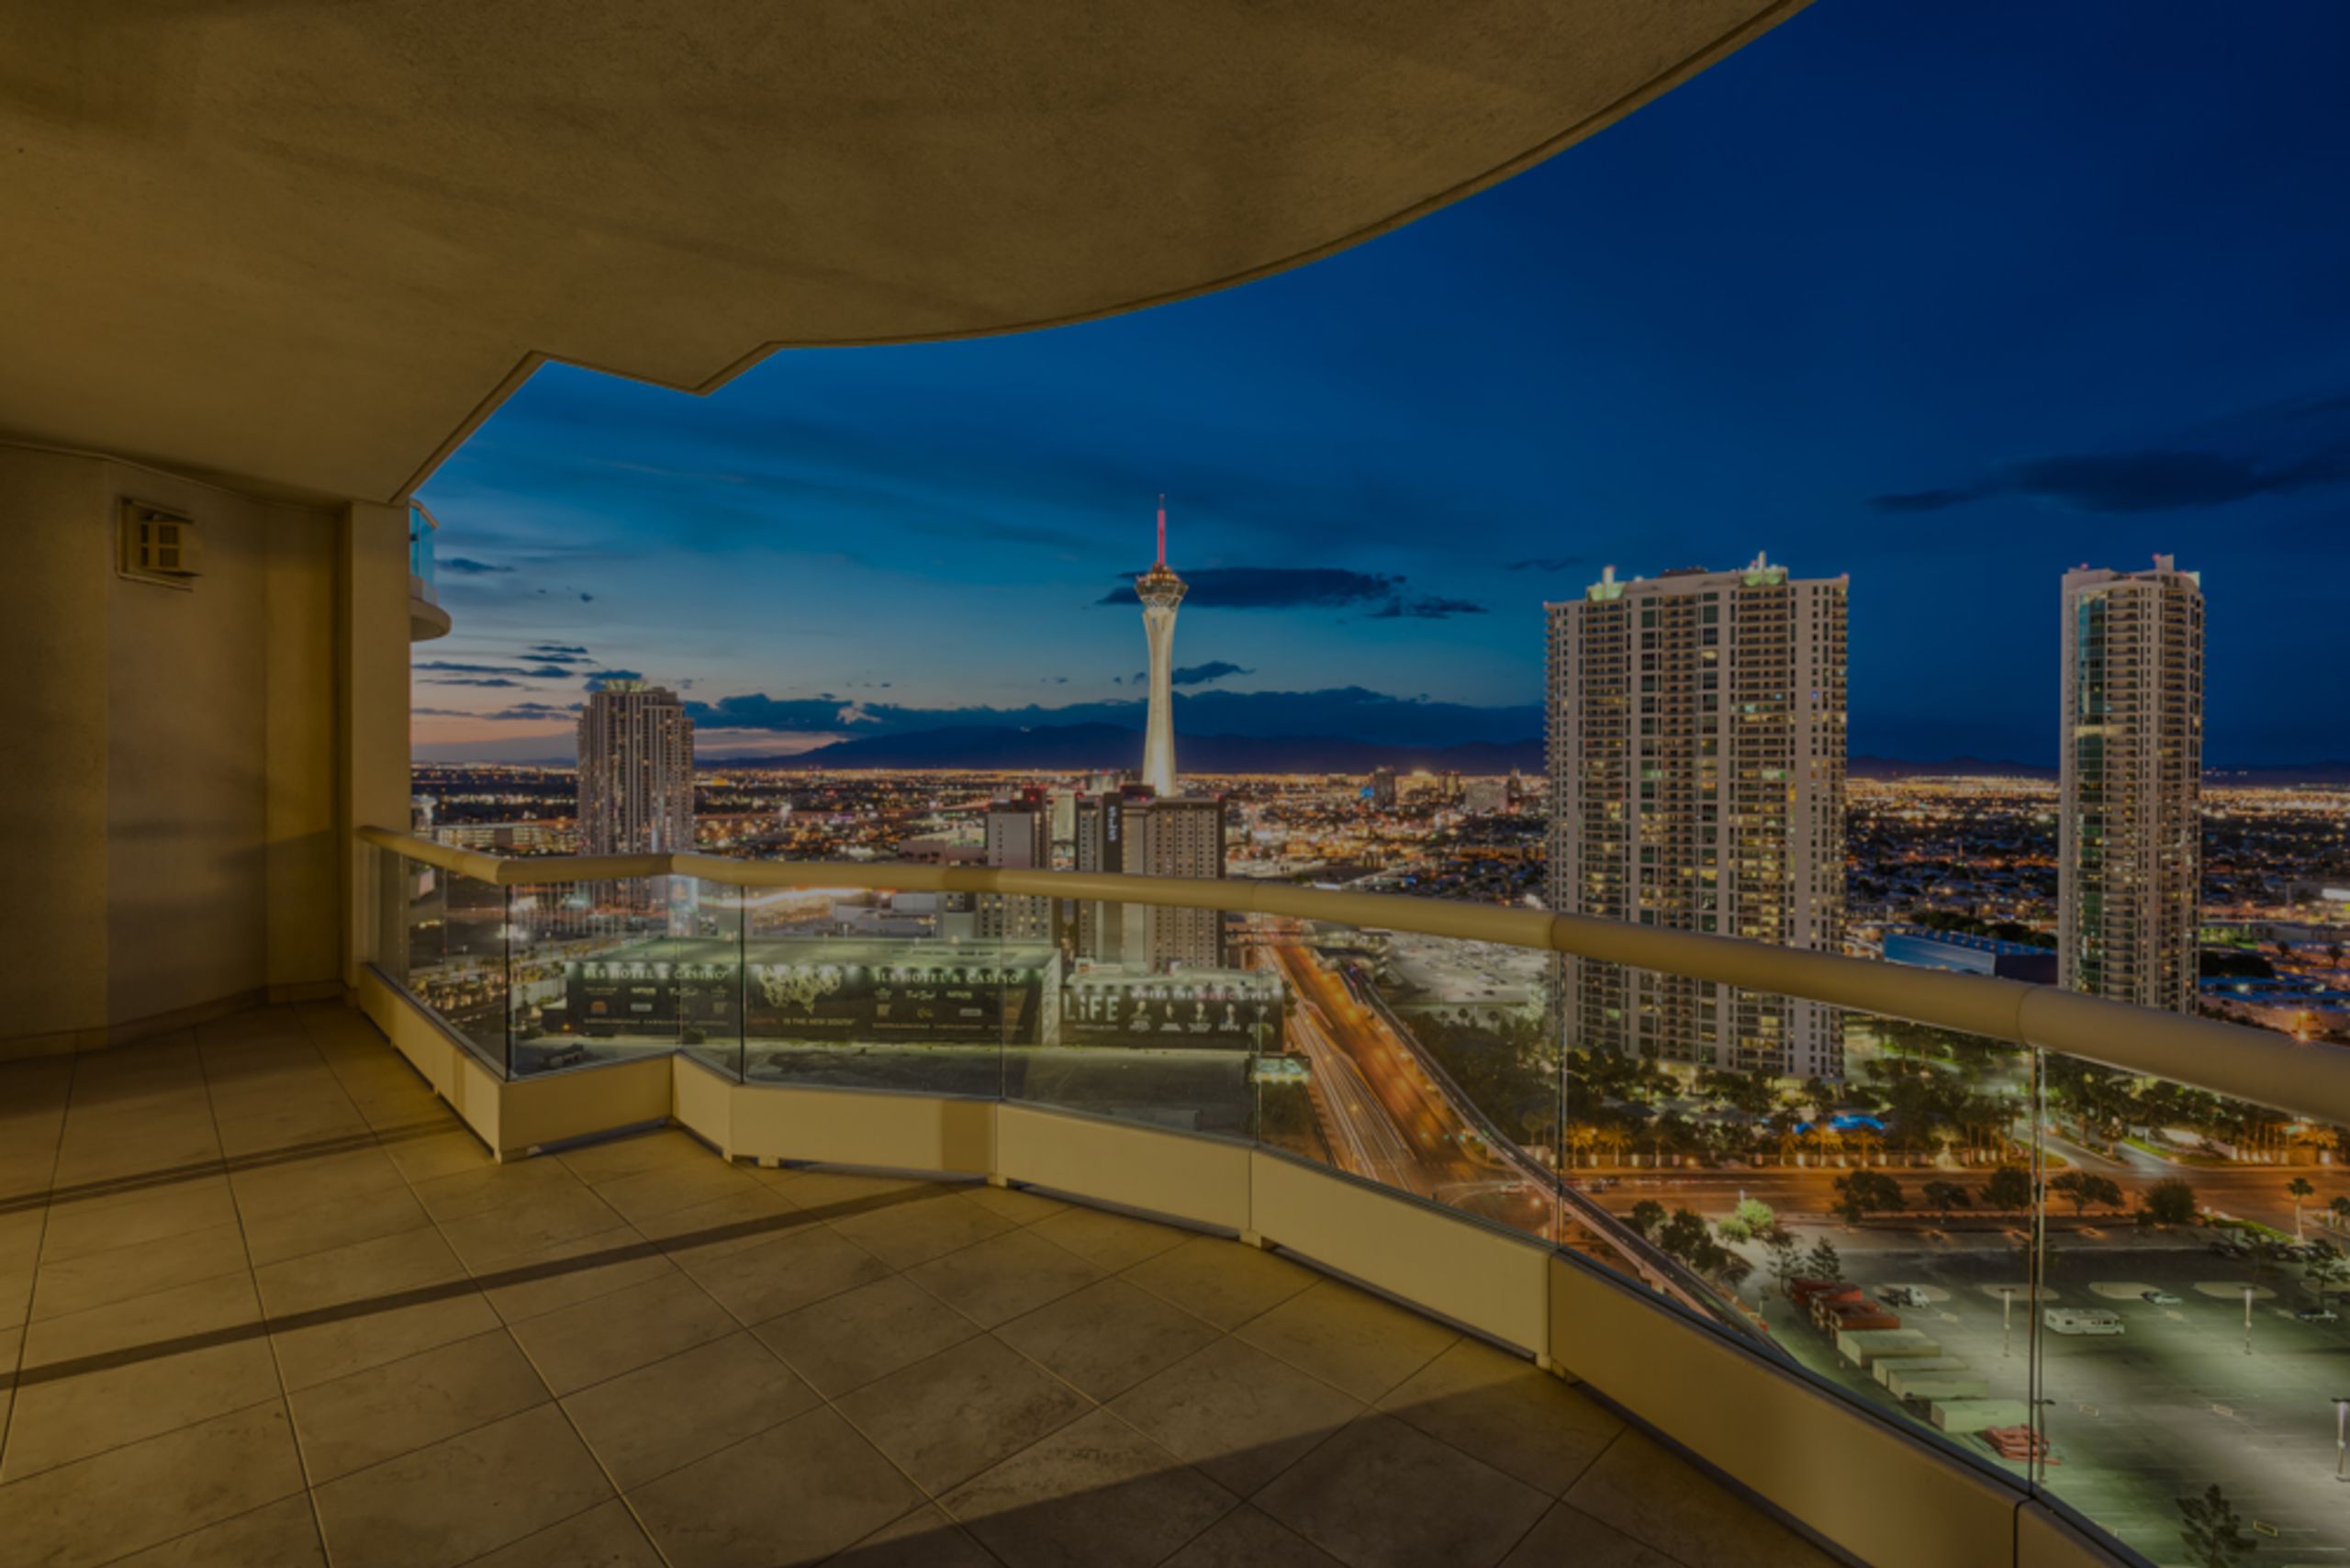 Las Vegas Real Estate: Should you invest in high rises?